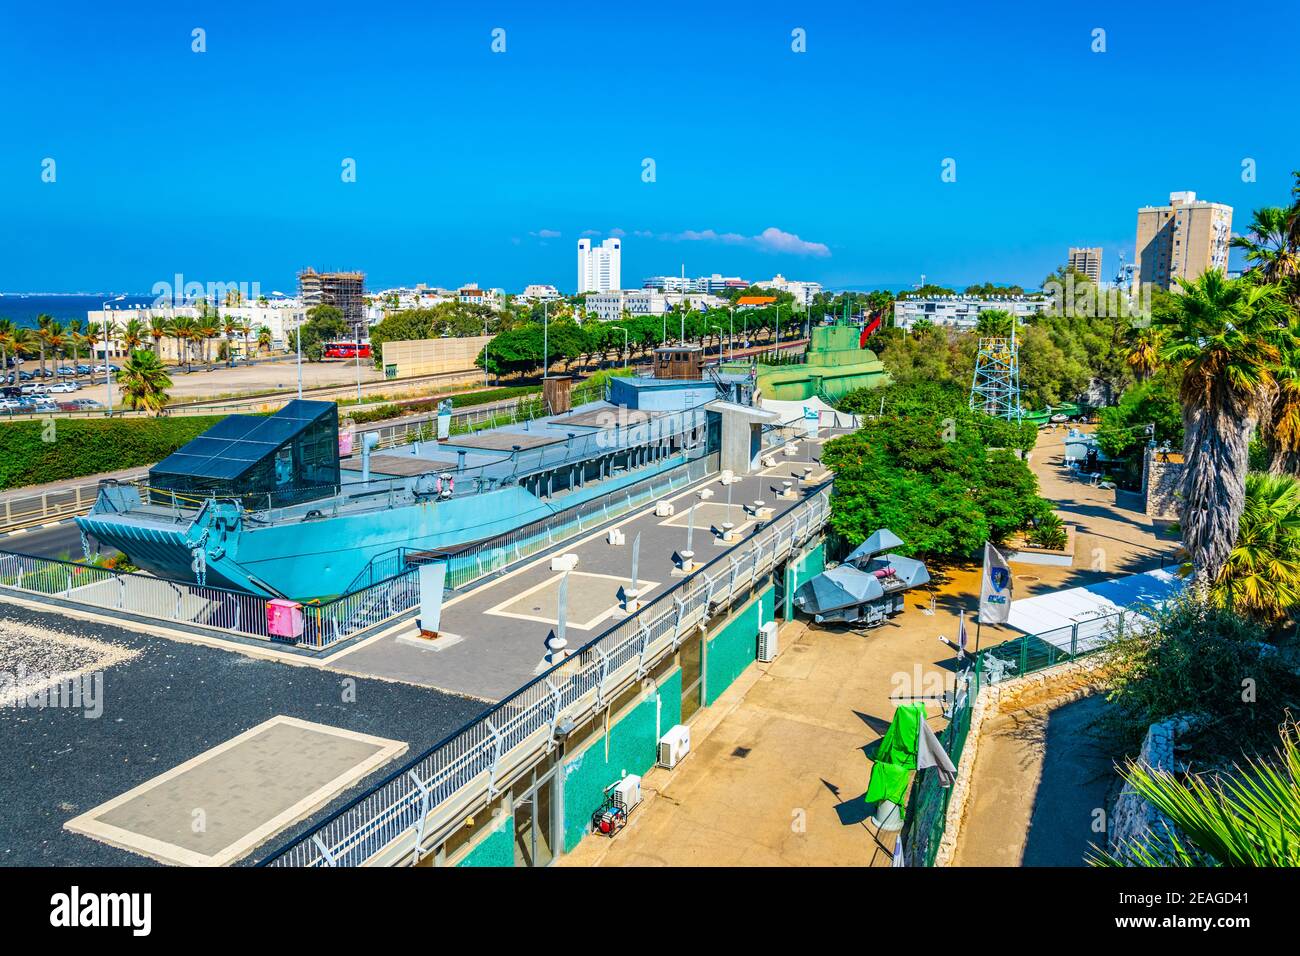 Clandestine immigration and naval museum in Haifa, Israel Stock Photo